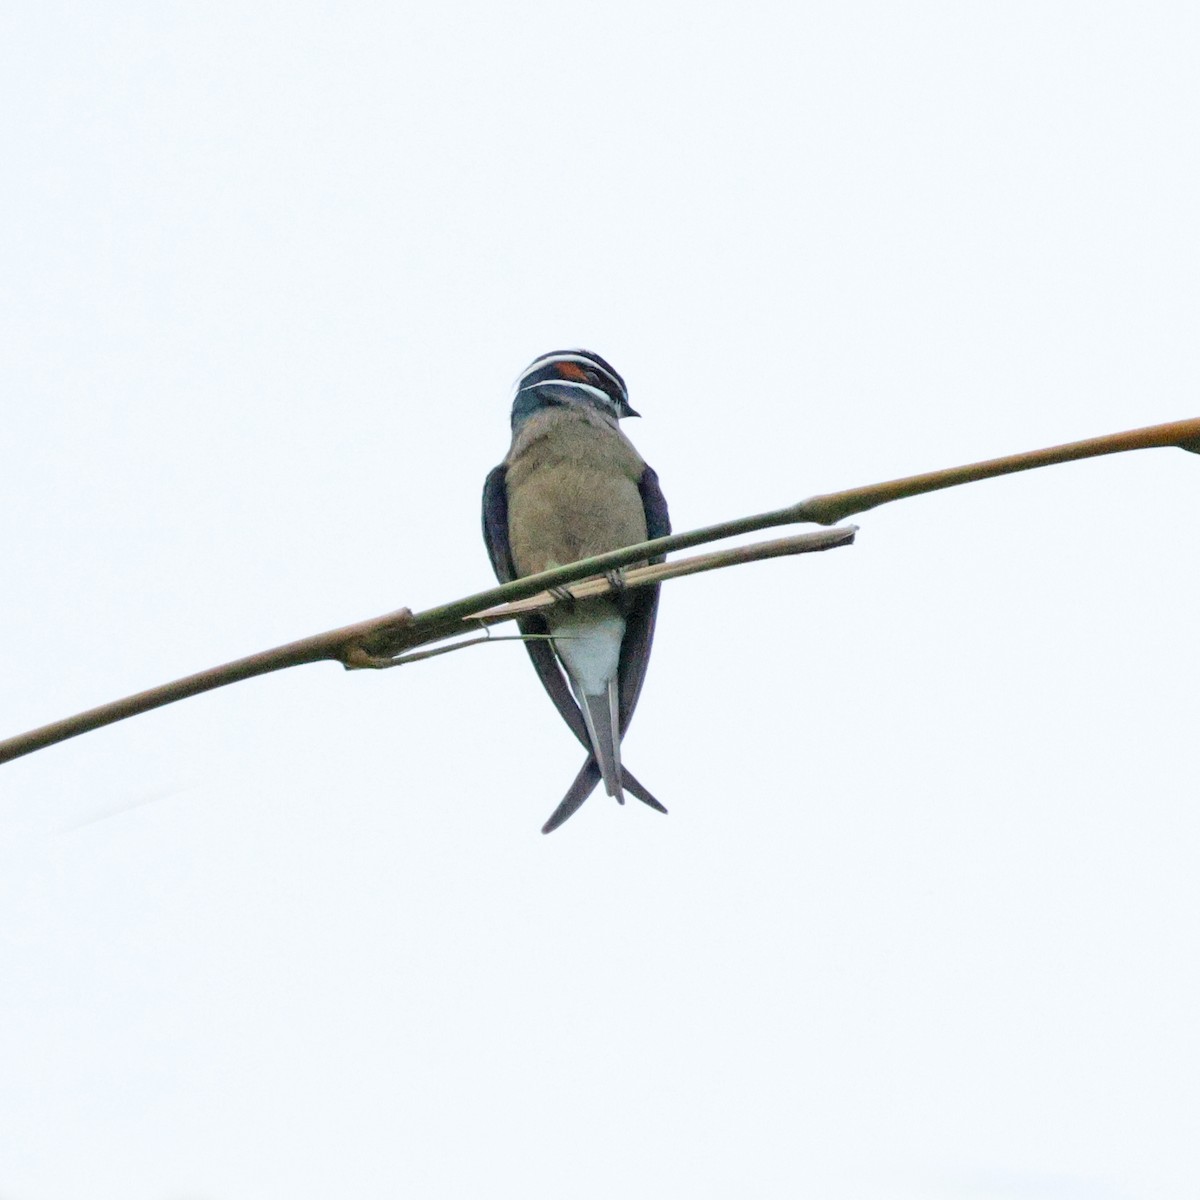 Whiskered Treeswift - Ching Chai Liew